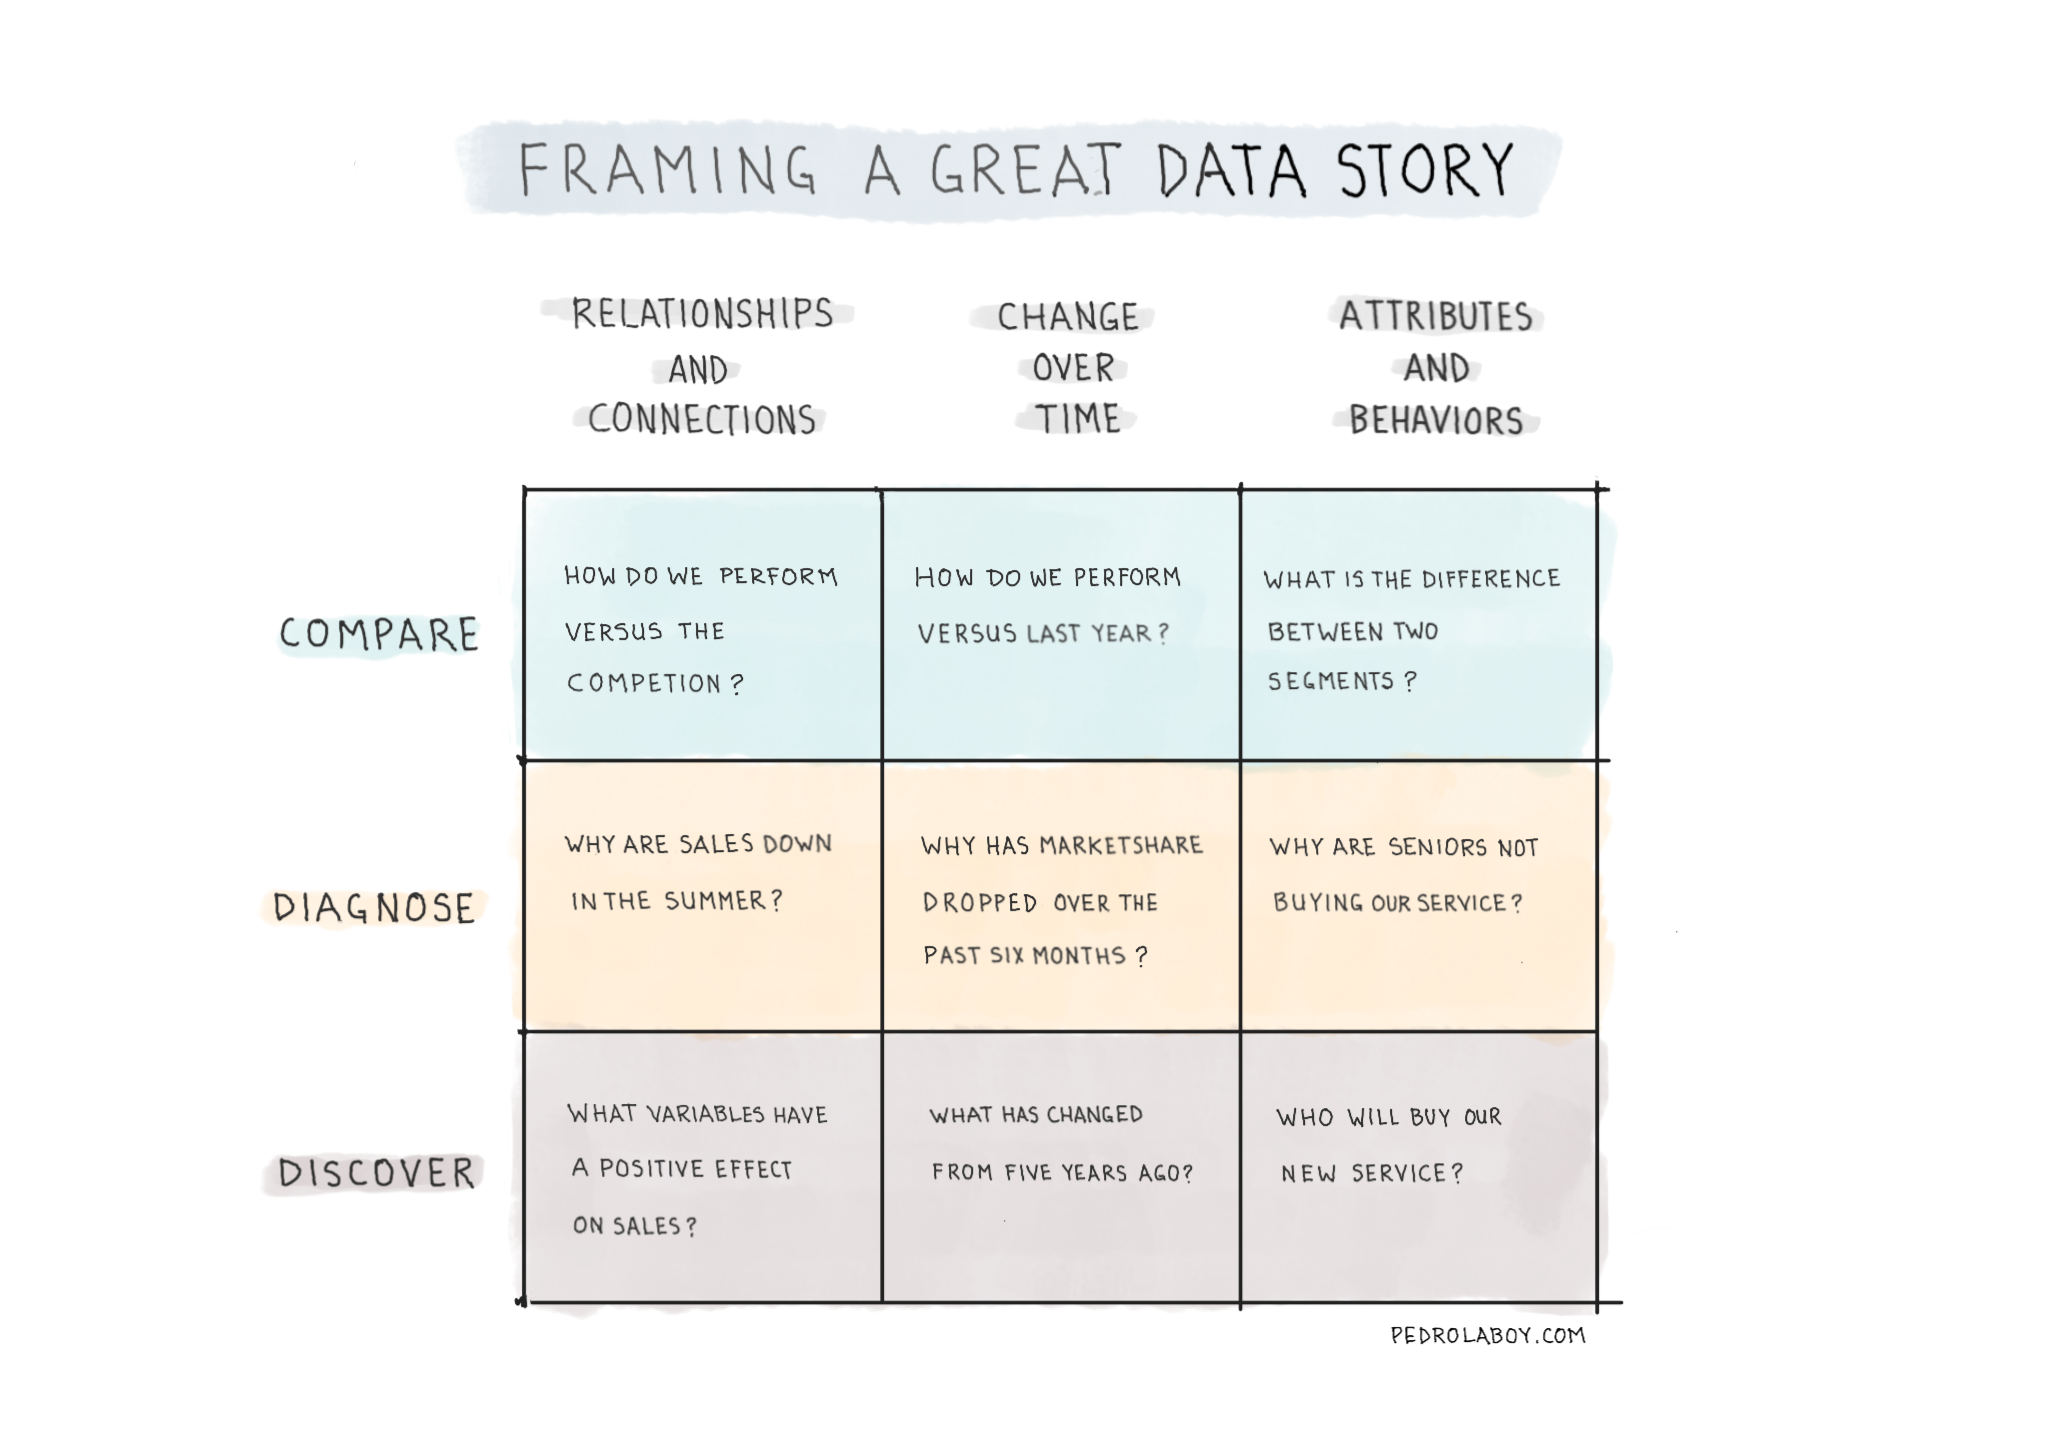 Notebook Thoughts: The Foundation of a Great Data Story